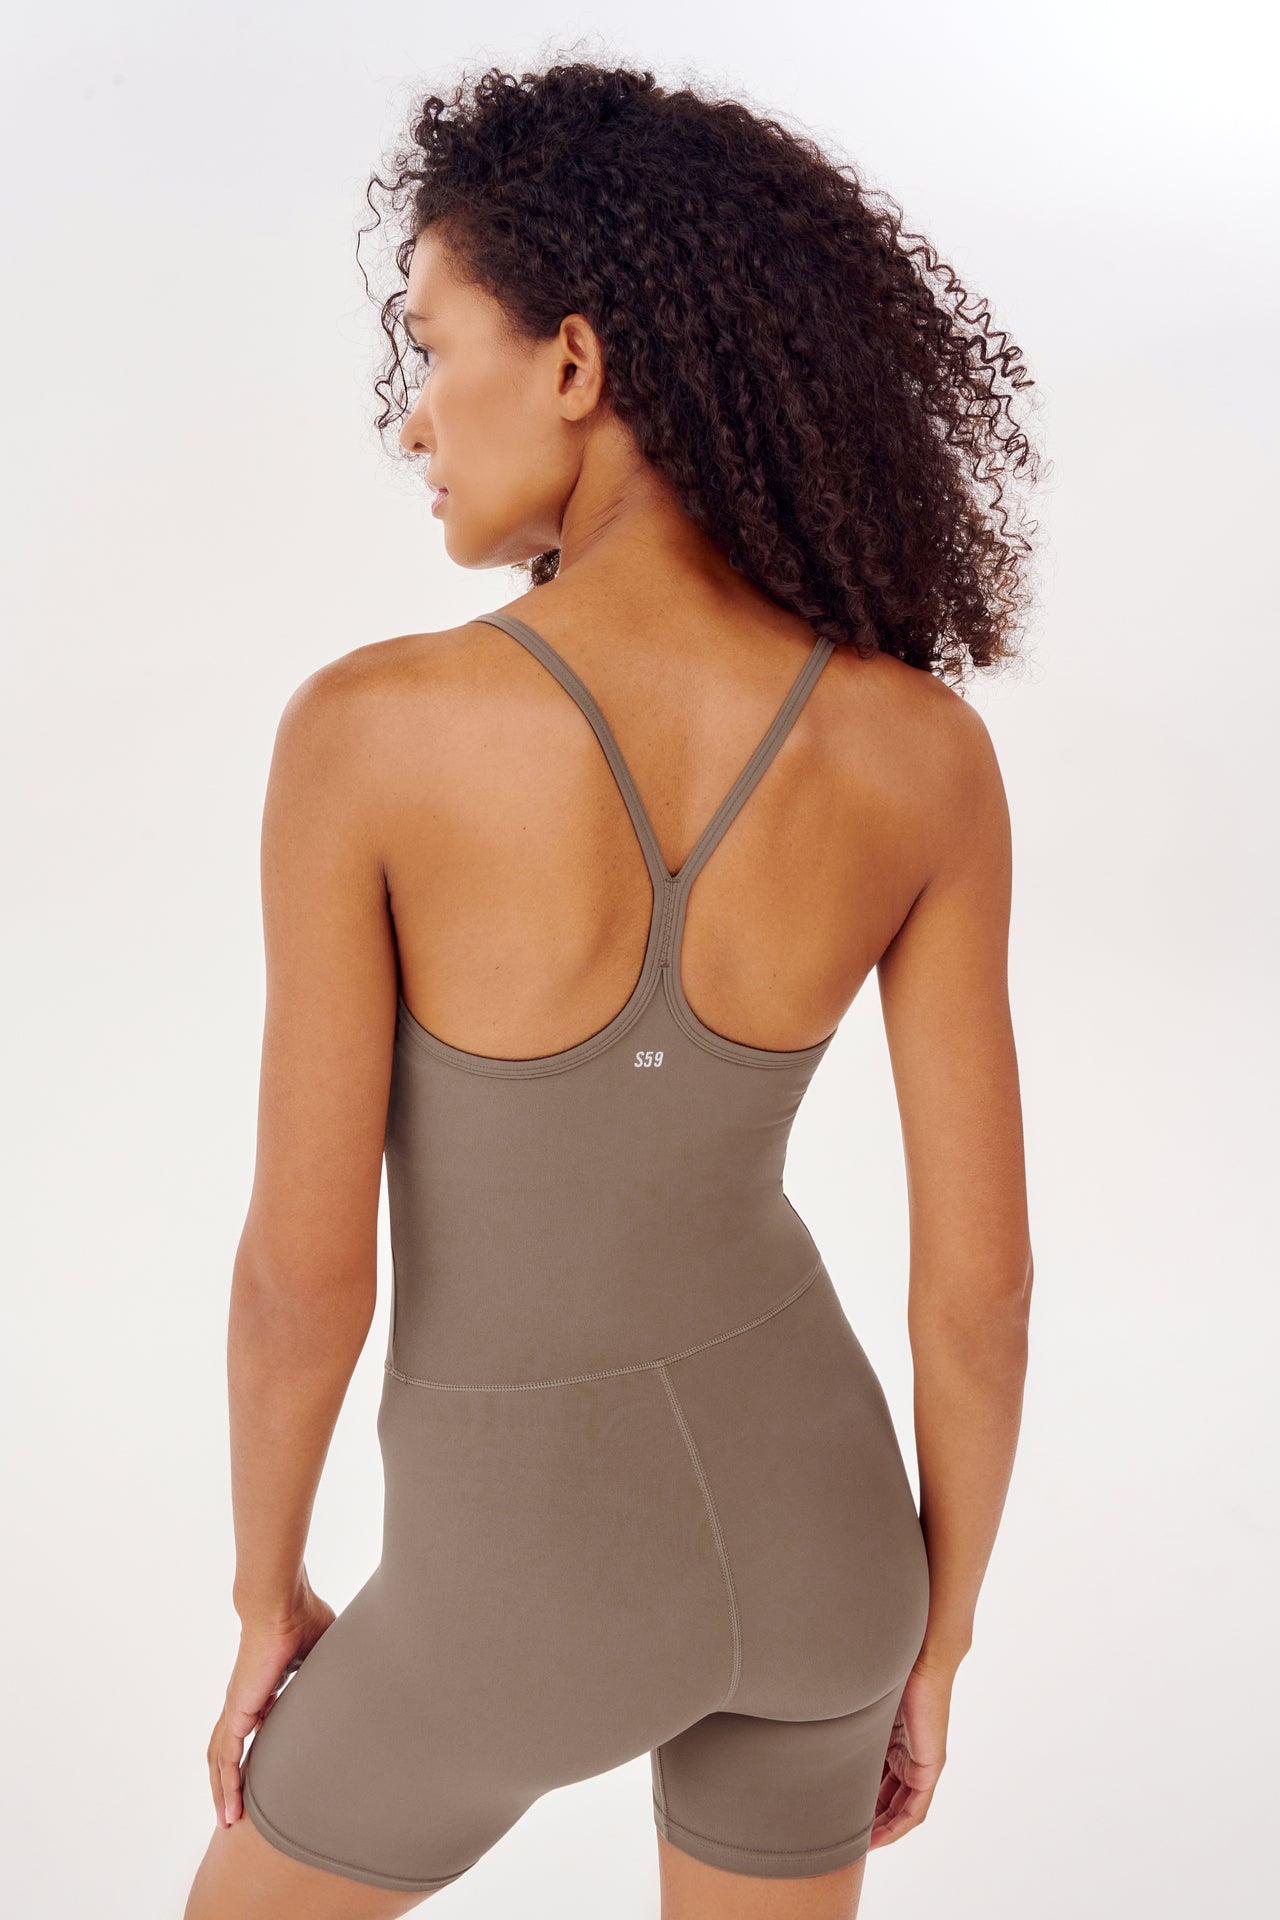 A woman in an Airweight 6” Short Jumpsuit designed for hot yoga by SPLITS59.